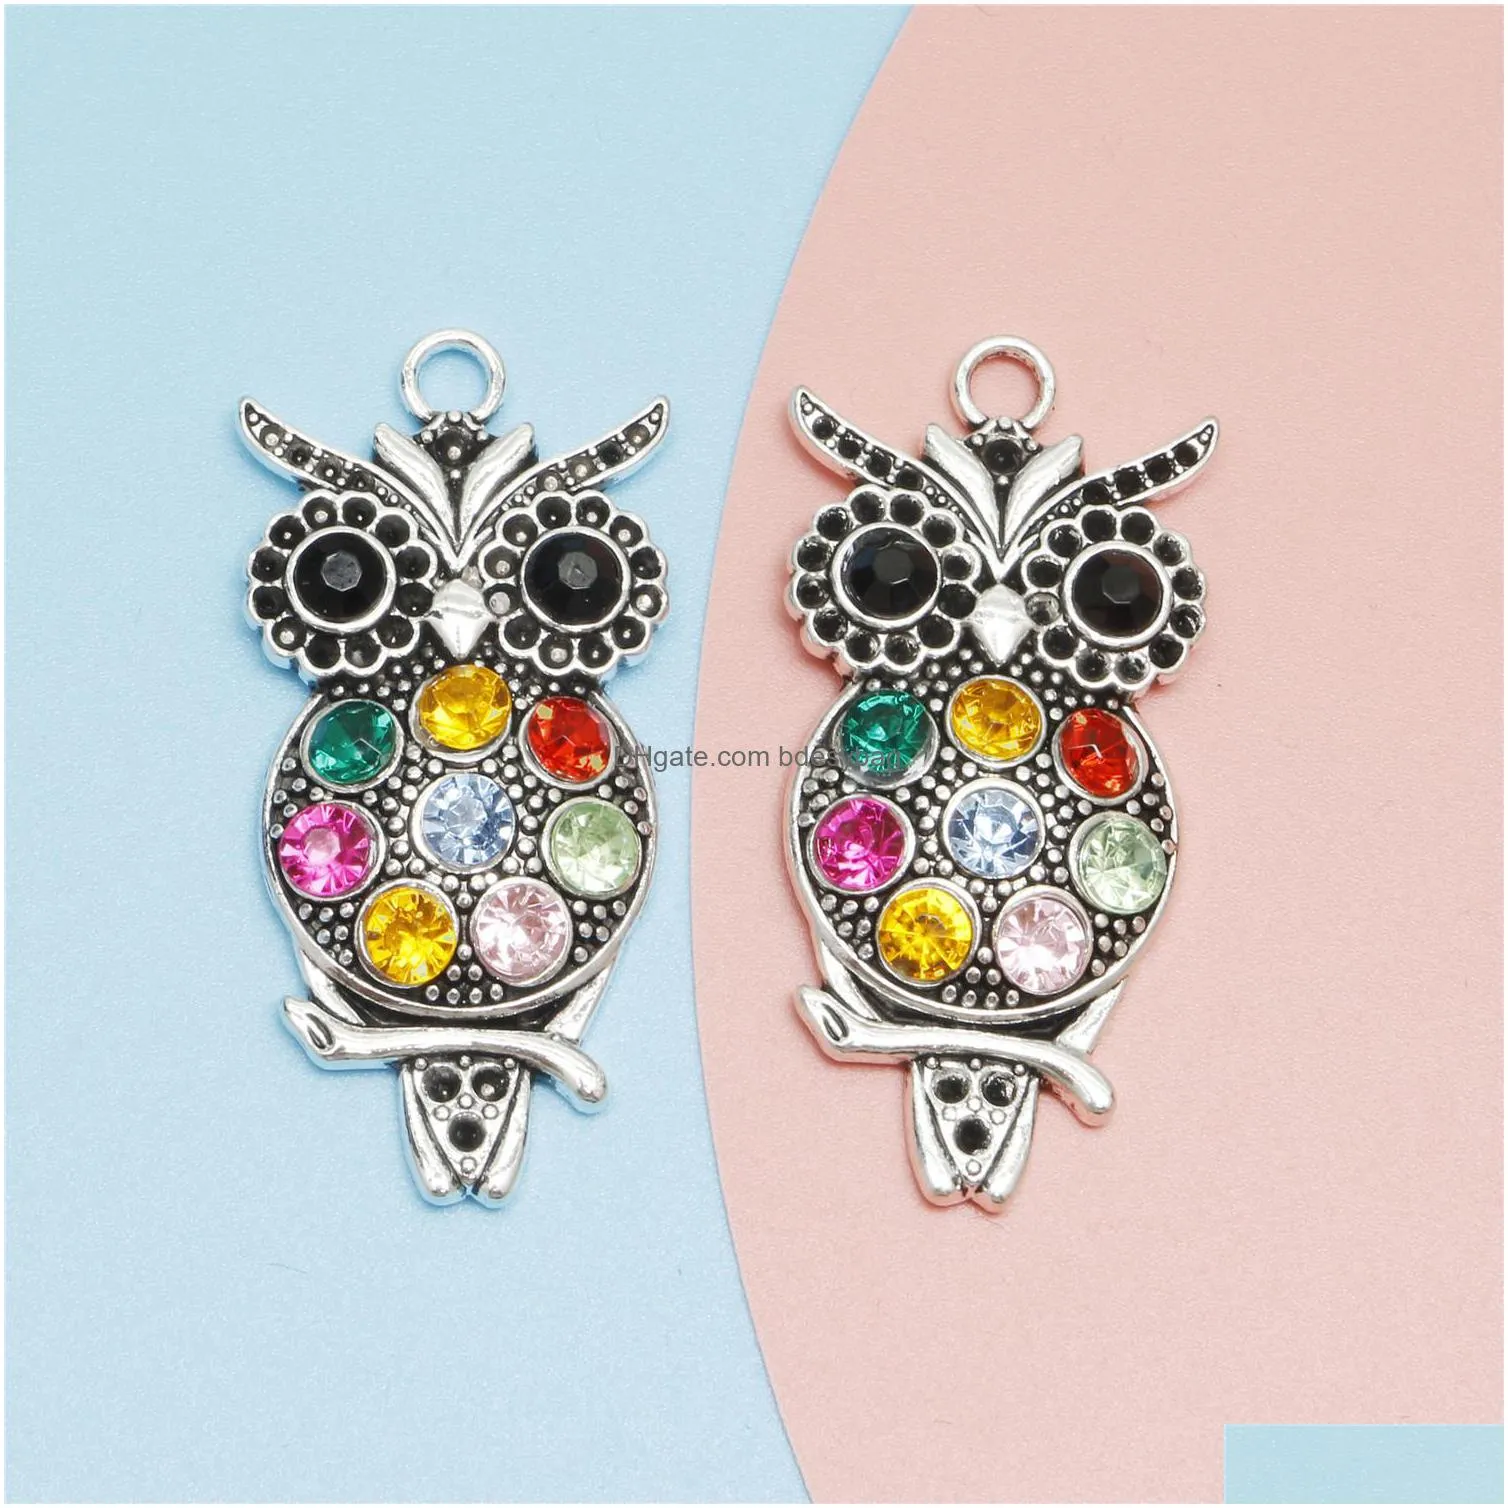 10pcs antique silver plated colorful crystal owl charm pendants for jewelry accessories making bracelet diy 49x23mm